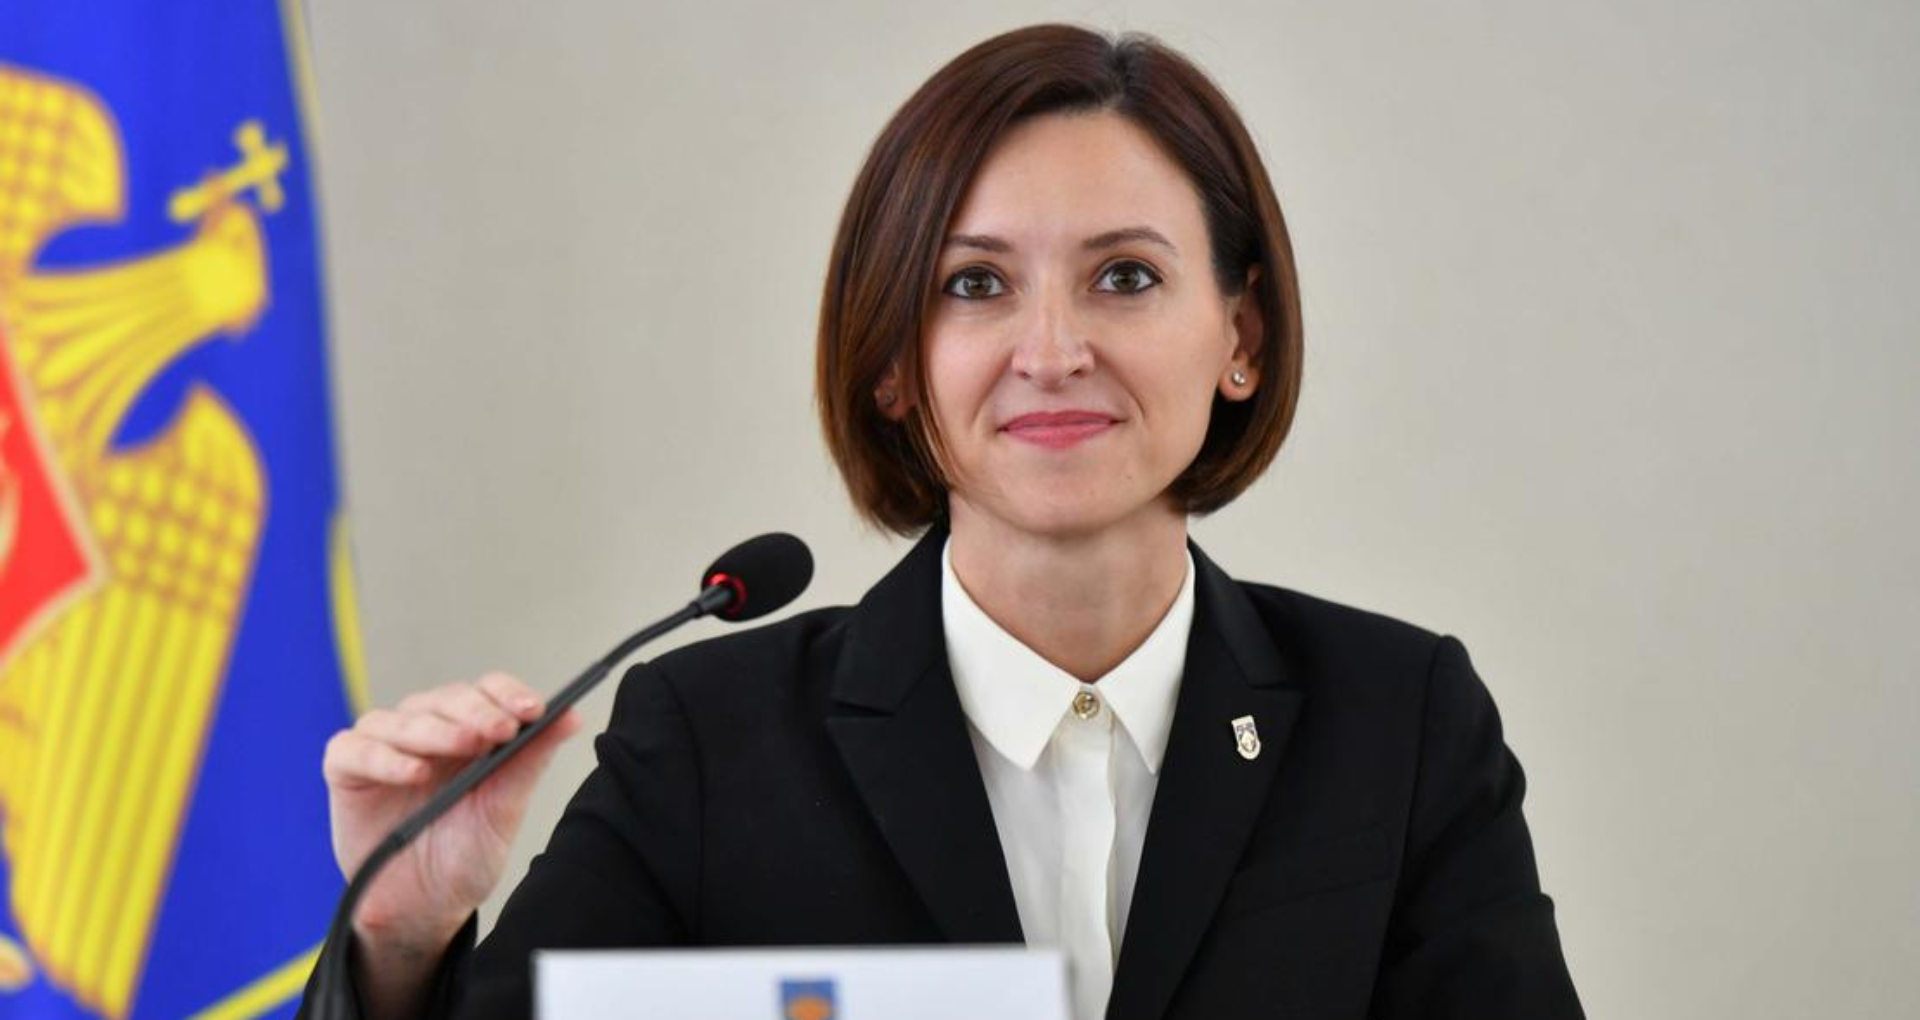 First press conference held by the Chief Prosecutor of the Anti-Corruption Prosecutor’s Office. Veronica Dragalin: “In every field there must be living examples of how the corrupt go to jail”